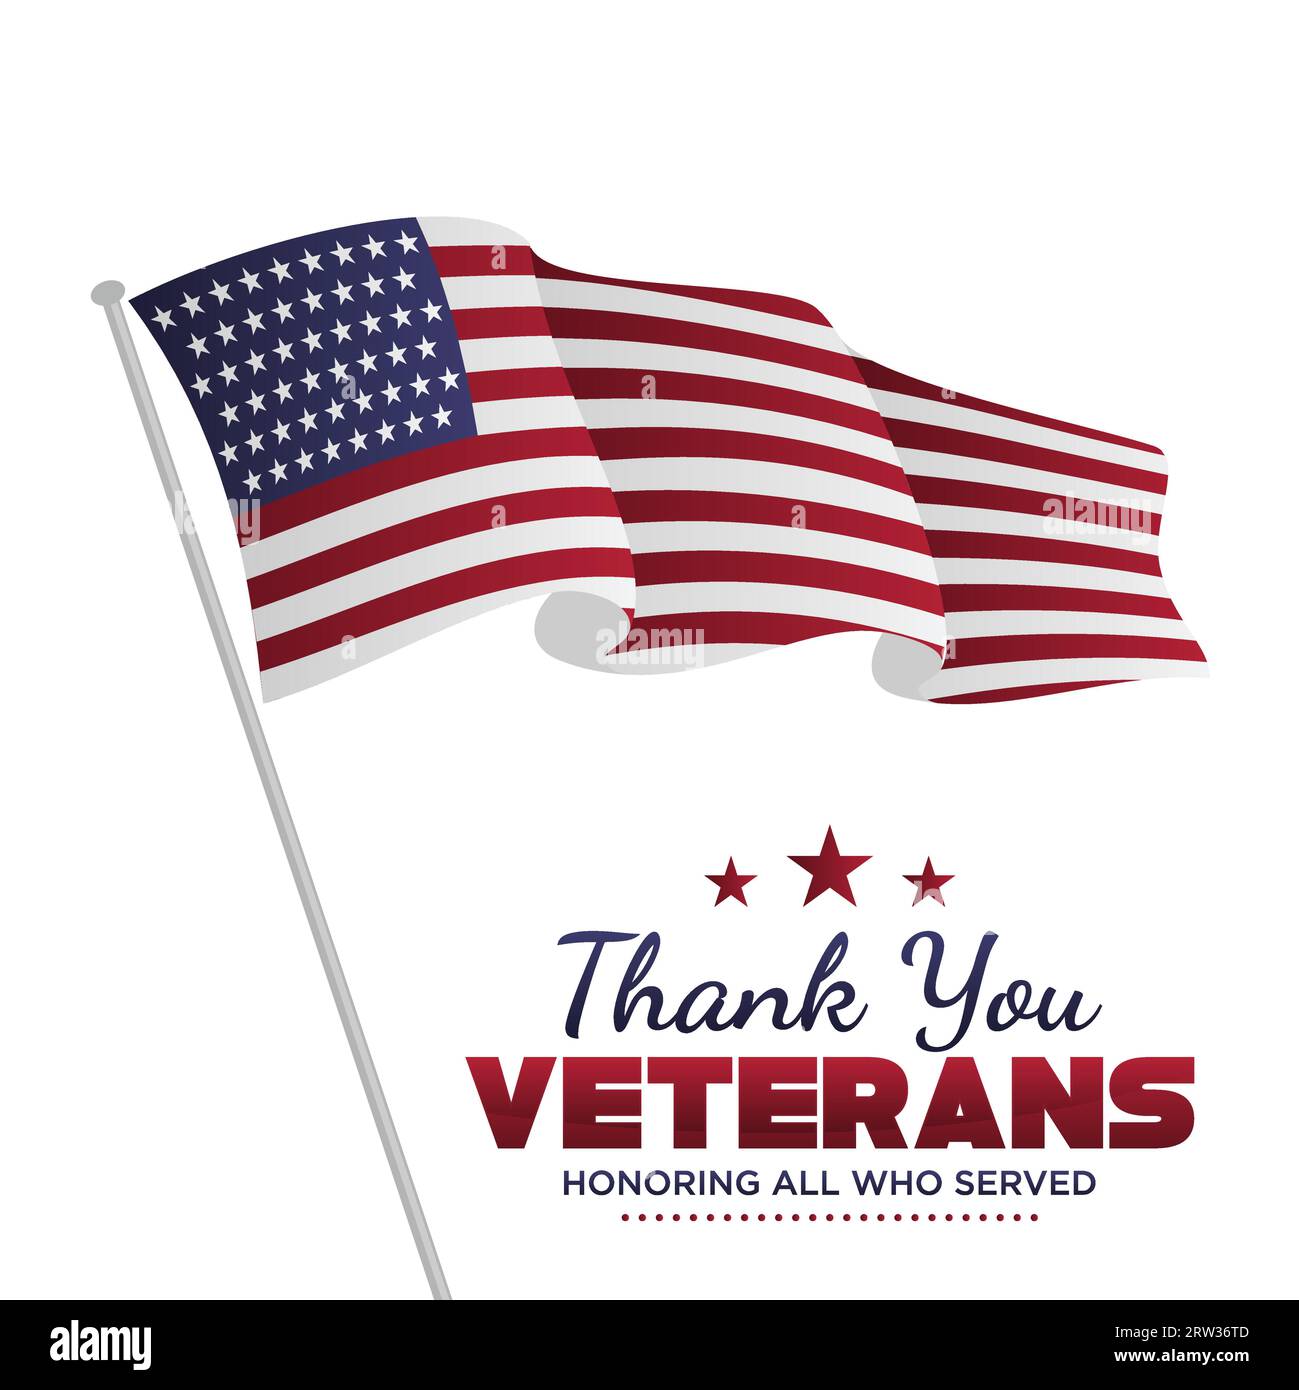 Template vector United States flag for Veterans Day background. Vector illustration Stock Vector